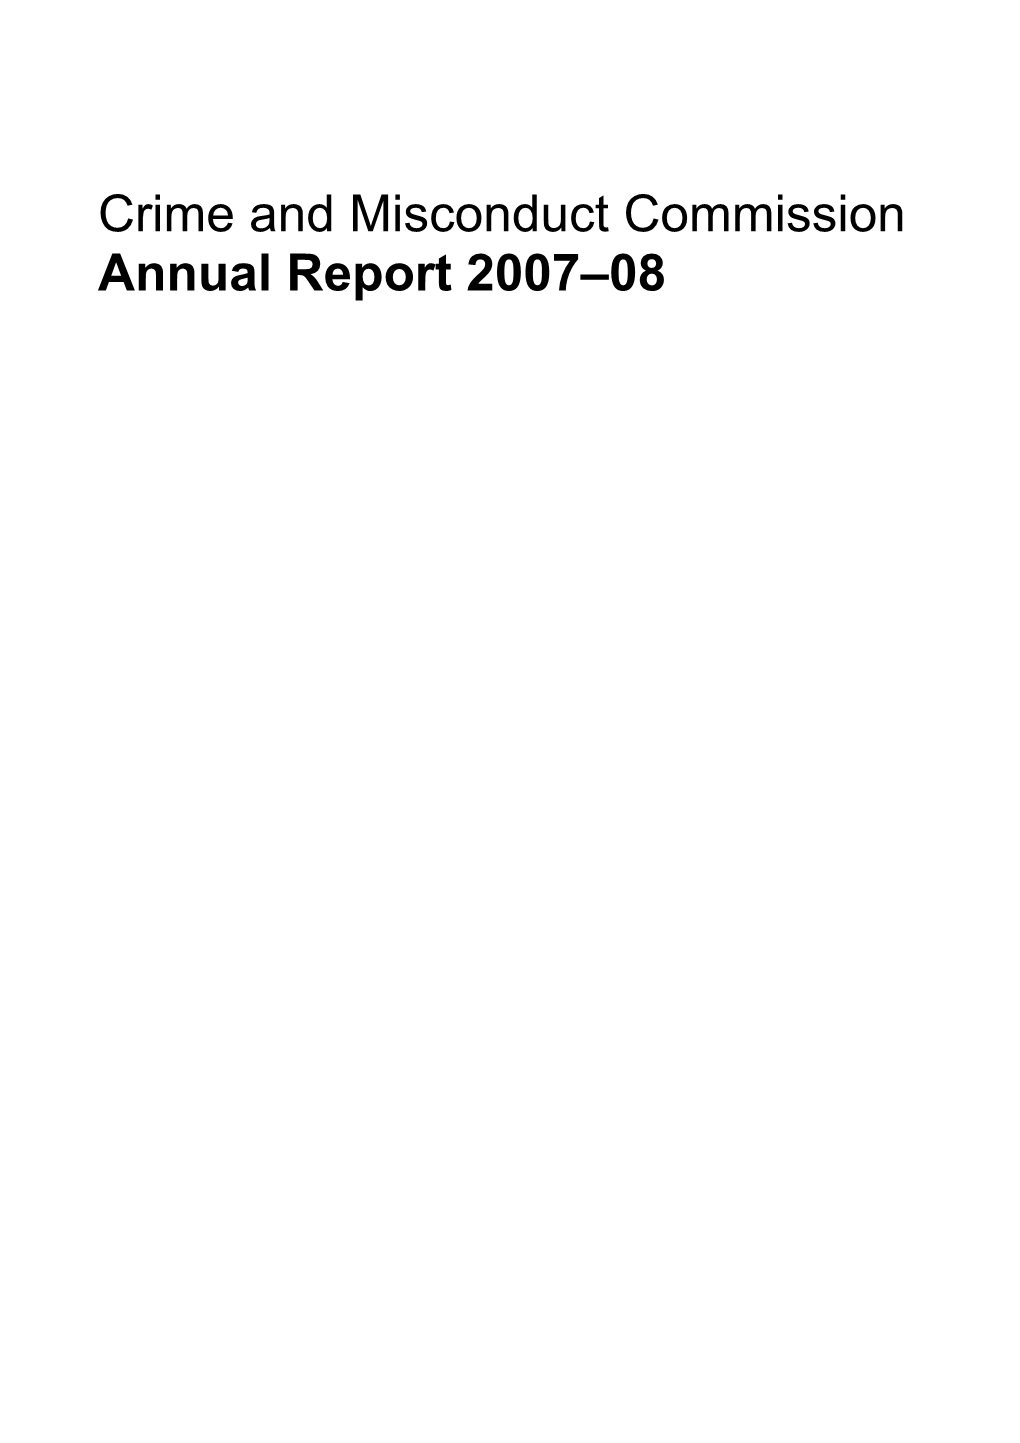 Crime and Misconduct Commission Annual Report 2007 08